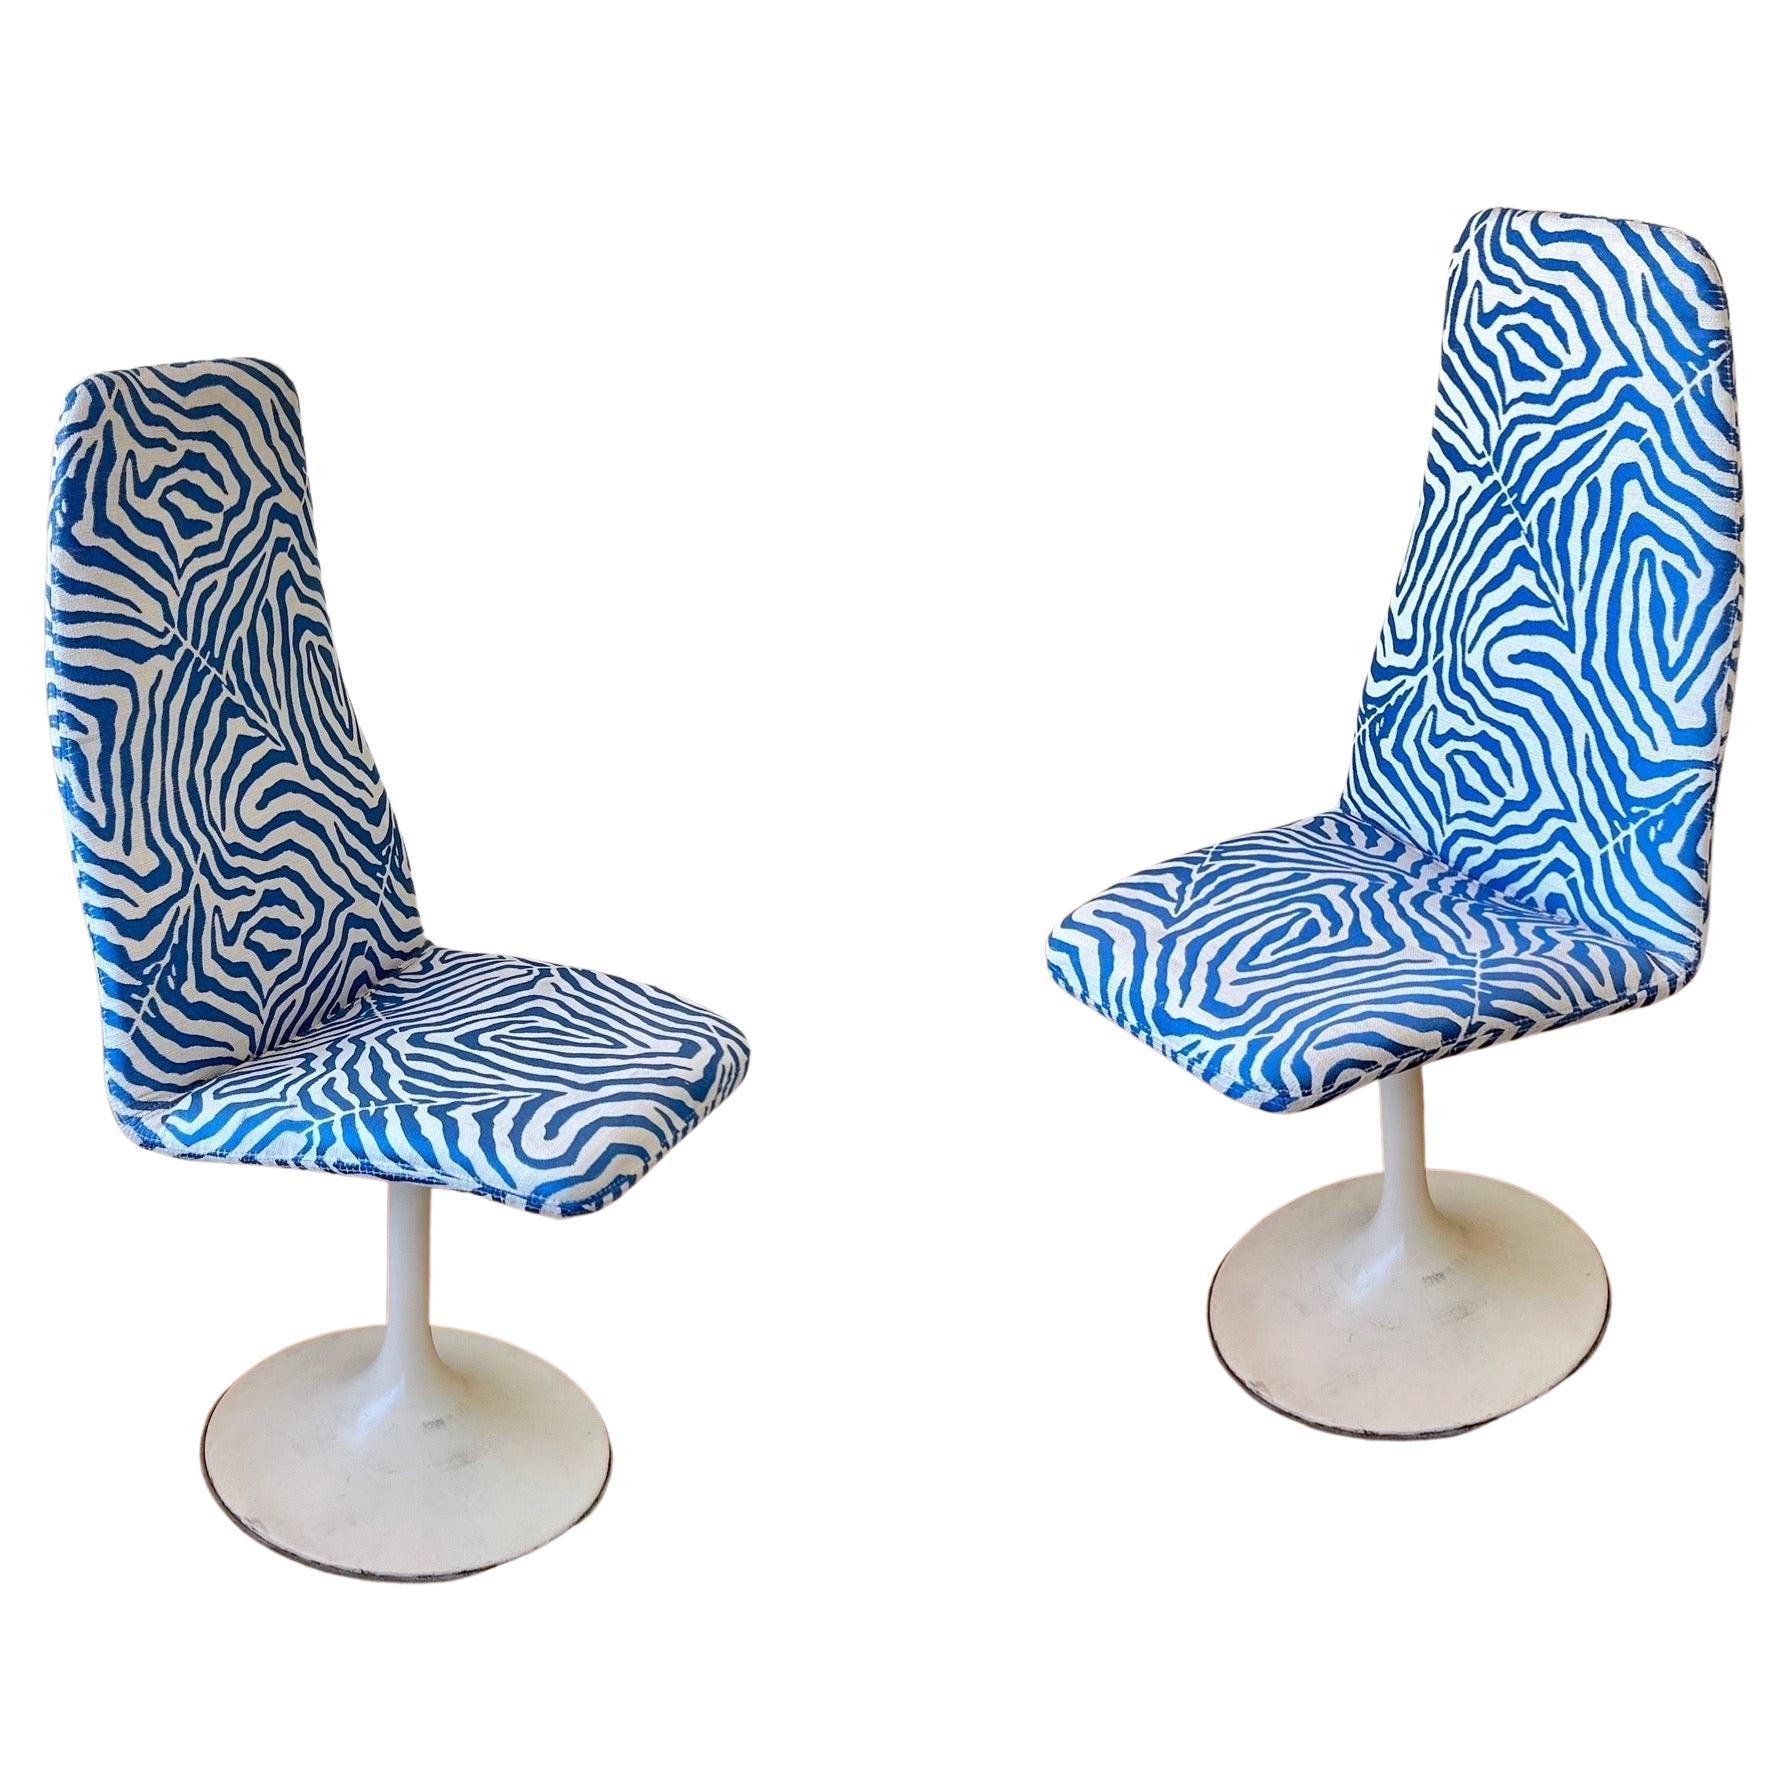 Pair of 1970's Italian Swivel Tall Chairs with Zebra Print Fabric For Sale